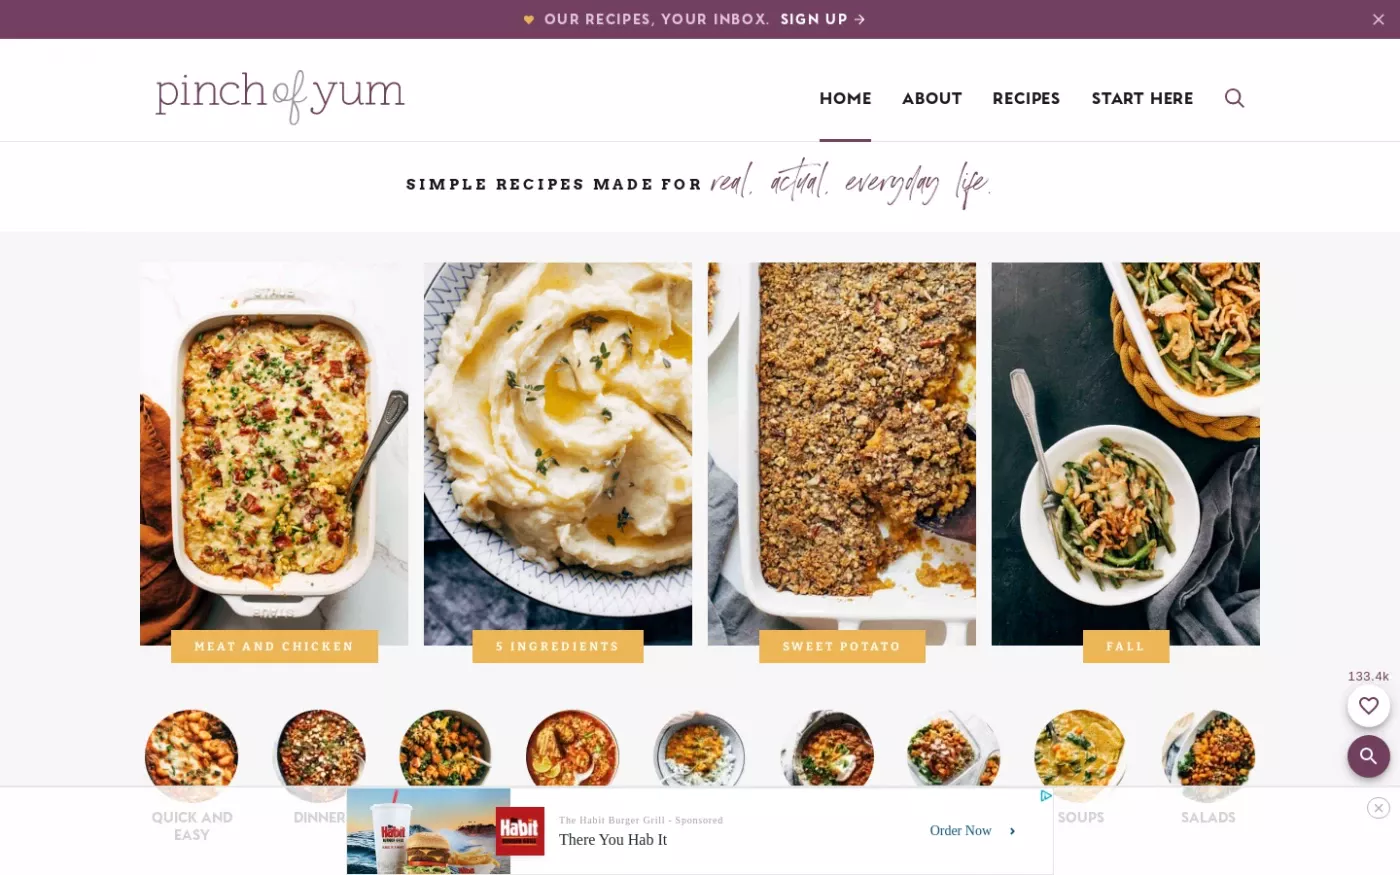 The Pinch of Yum Everything List - Pinch of Yum